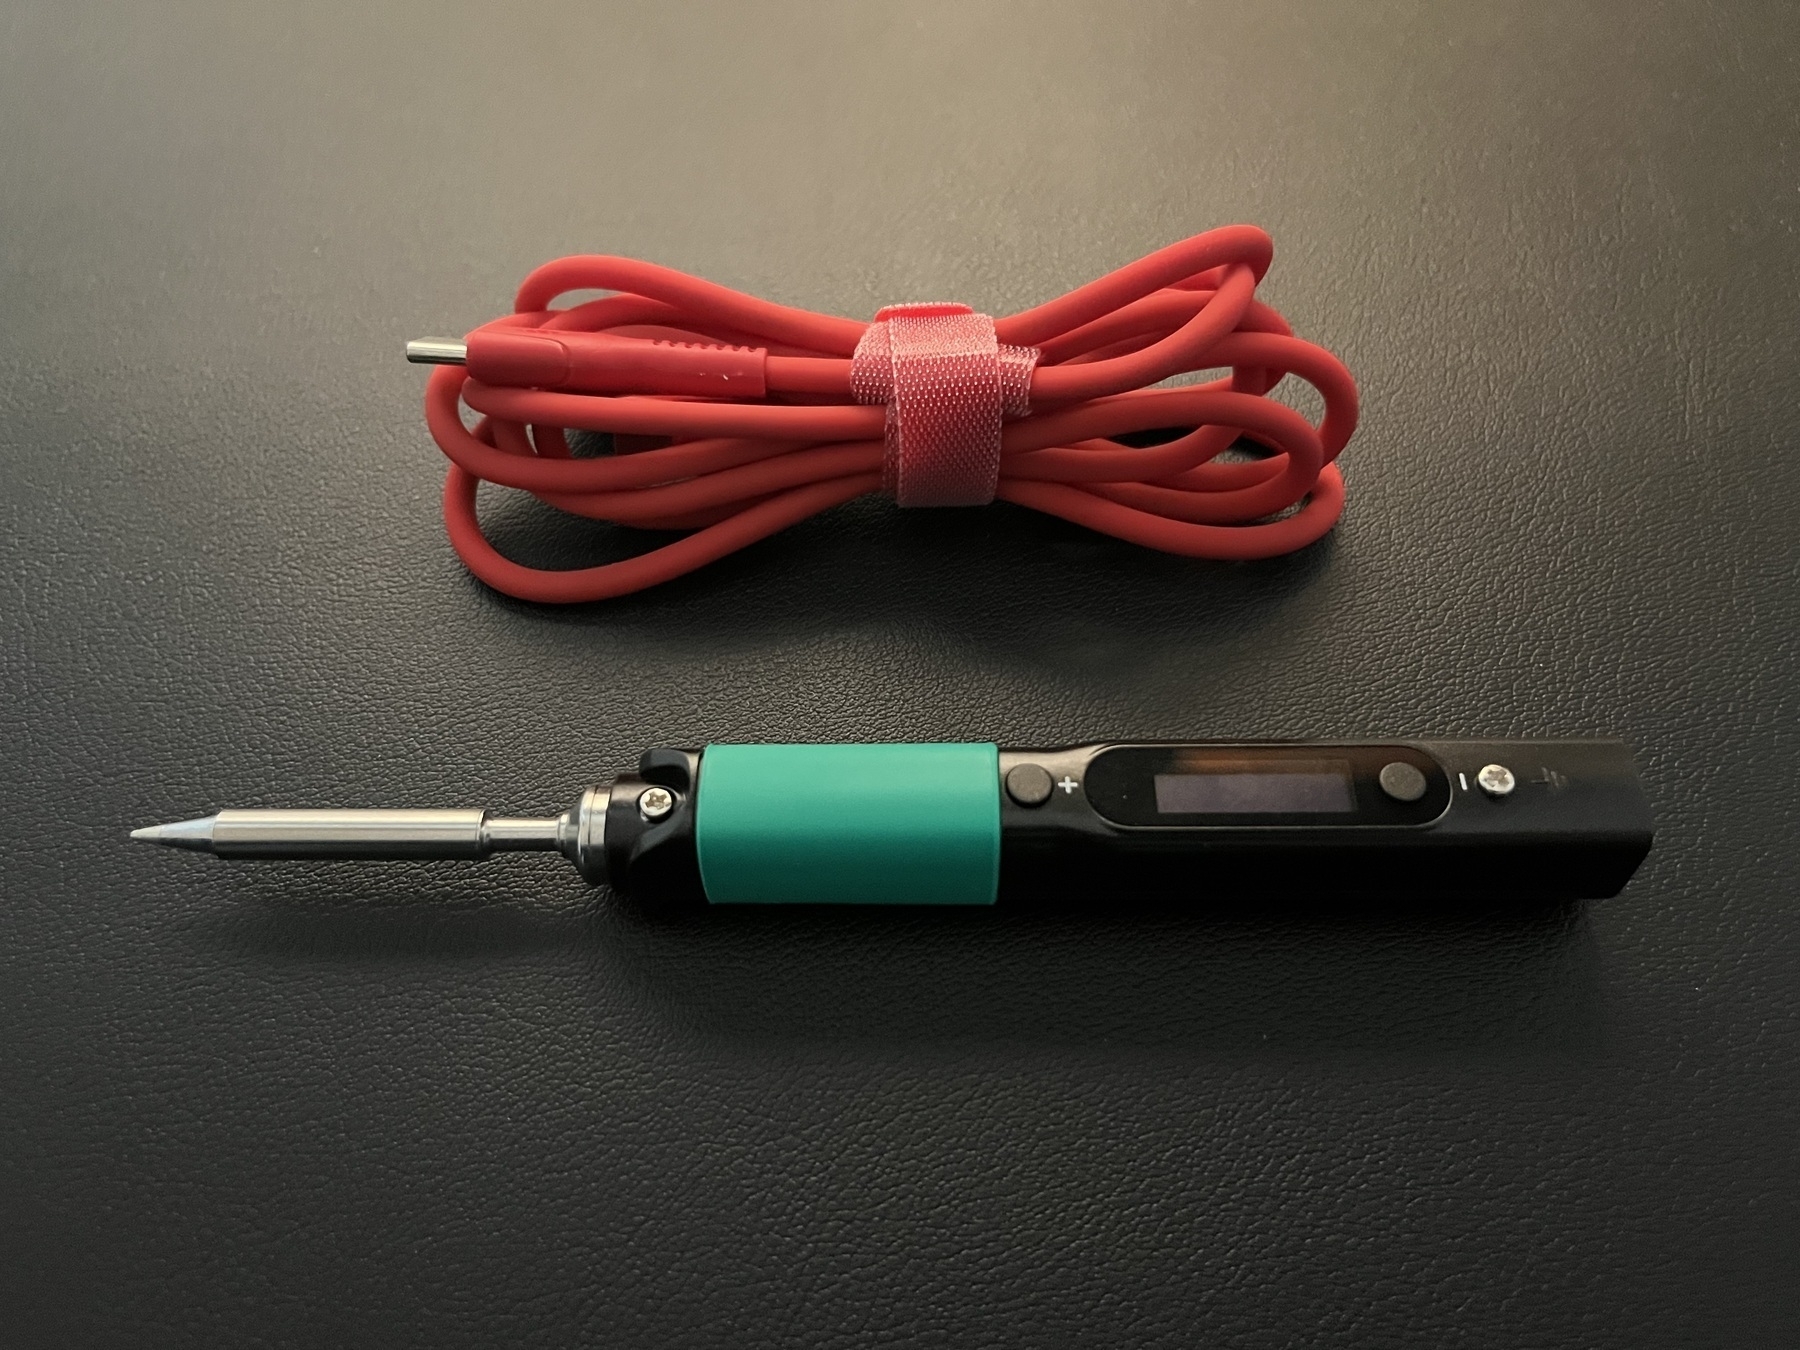 Photo of a soldering iron sitting on a black pleather mat.